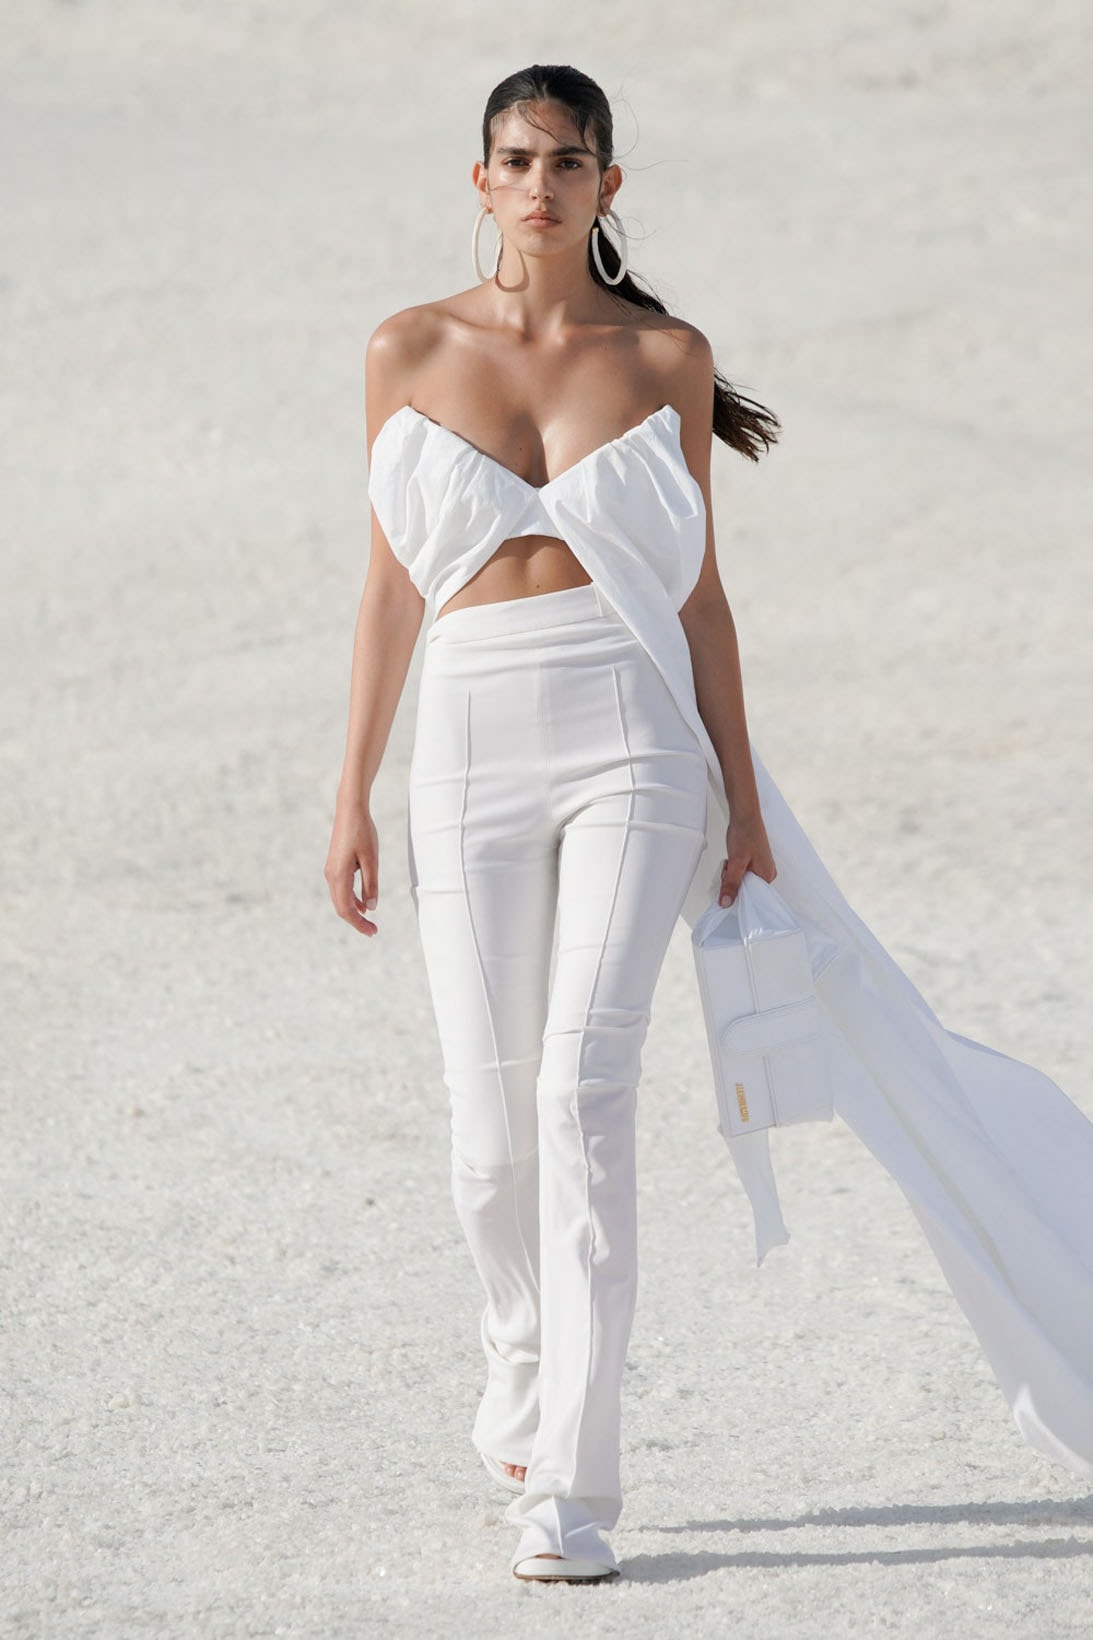 Jacquemus presents a nuptial show in the Camargue for its Fall